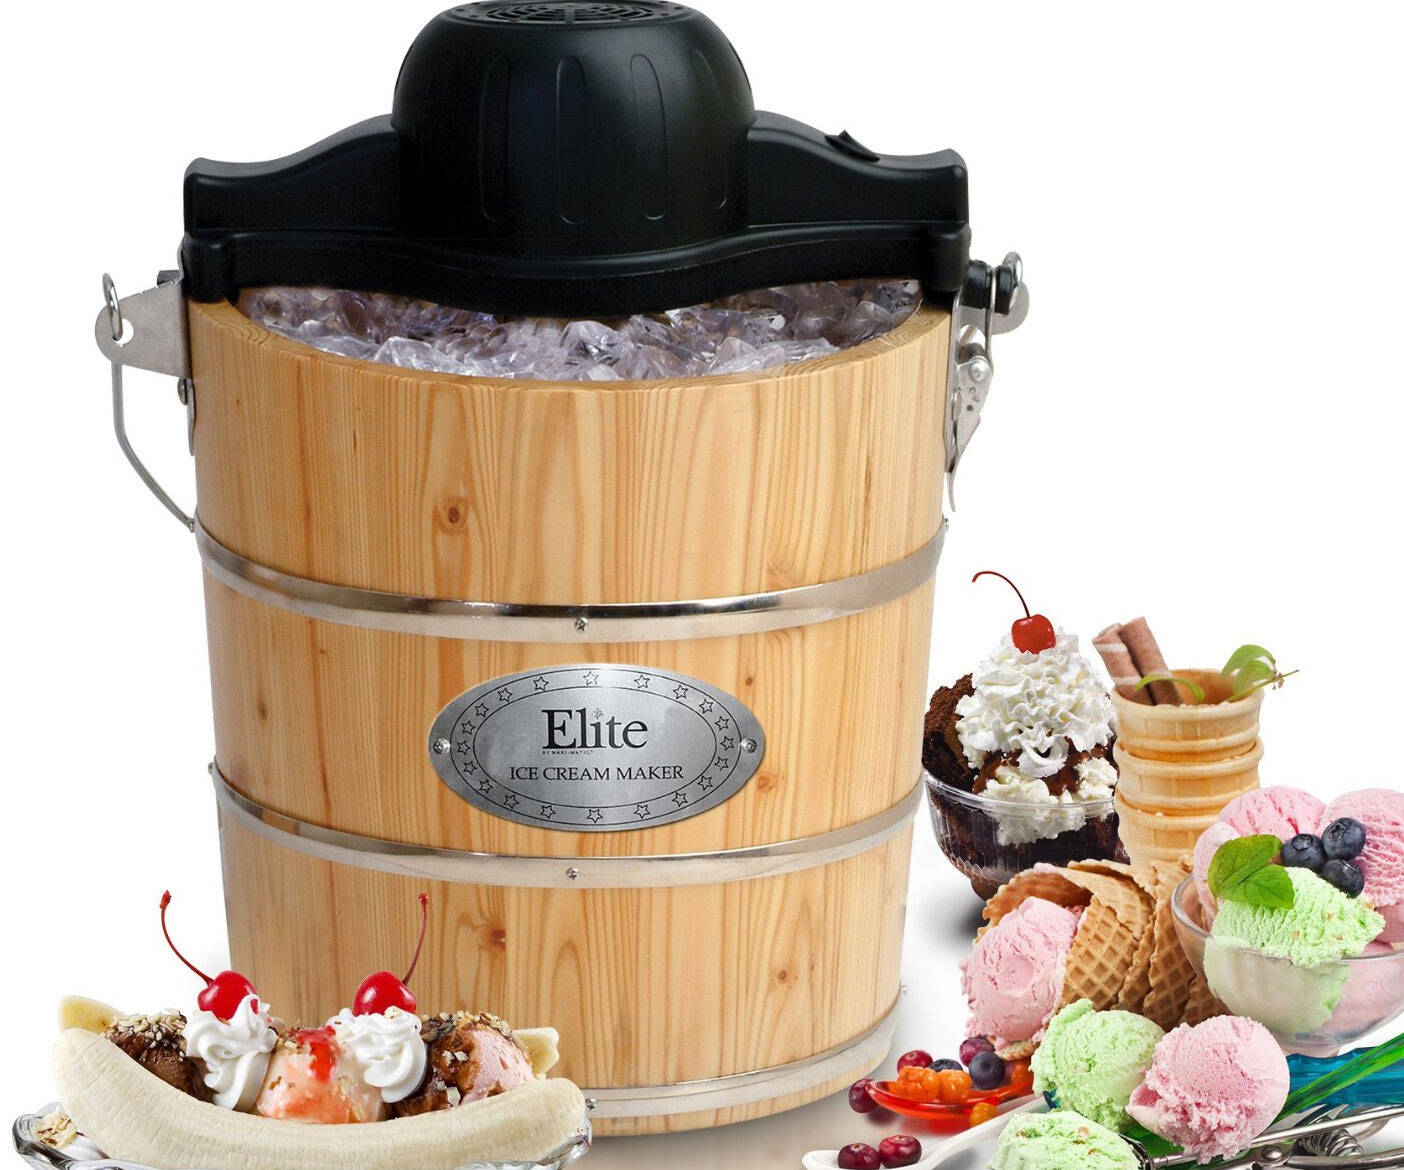 Old Fashioned Bucket Ice Cream Maker - //coolthings.us